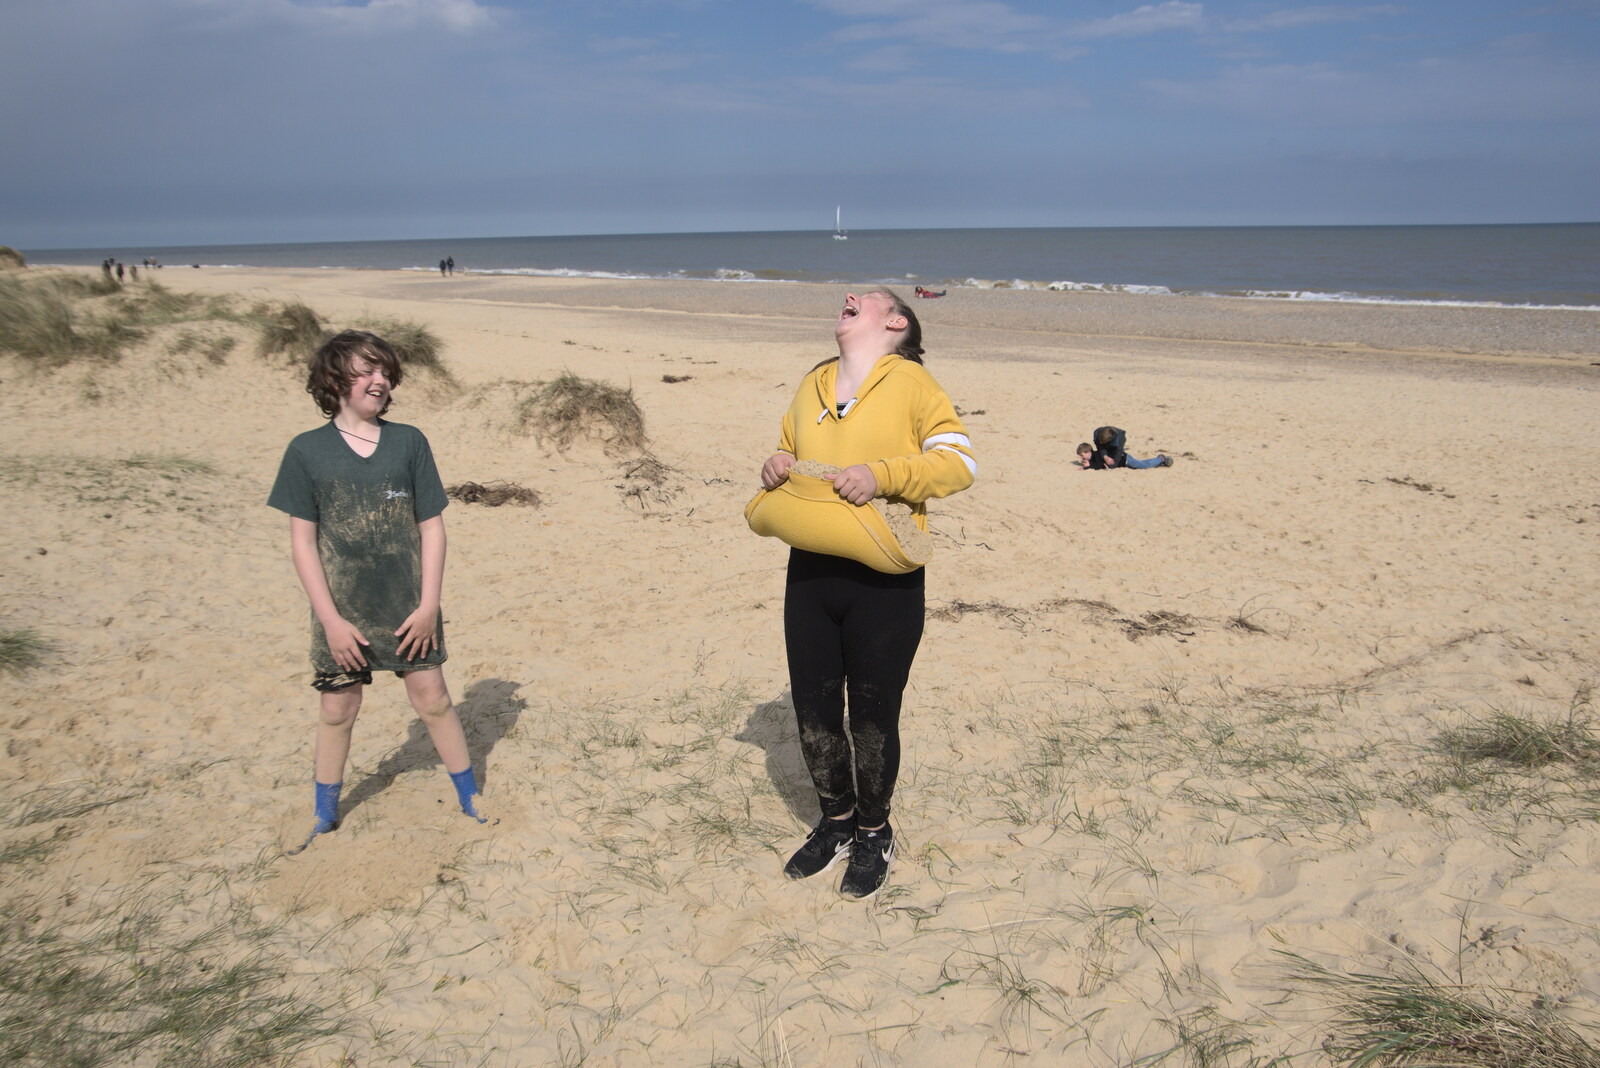 Soph the Roph finds it hilarious from A Chilly Trip to the Beach, Southwold Harbour, Suffolk - 2nd May 2021